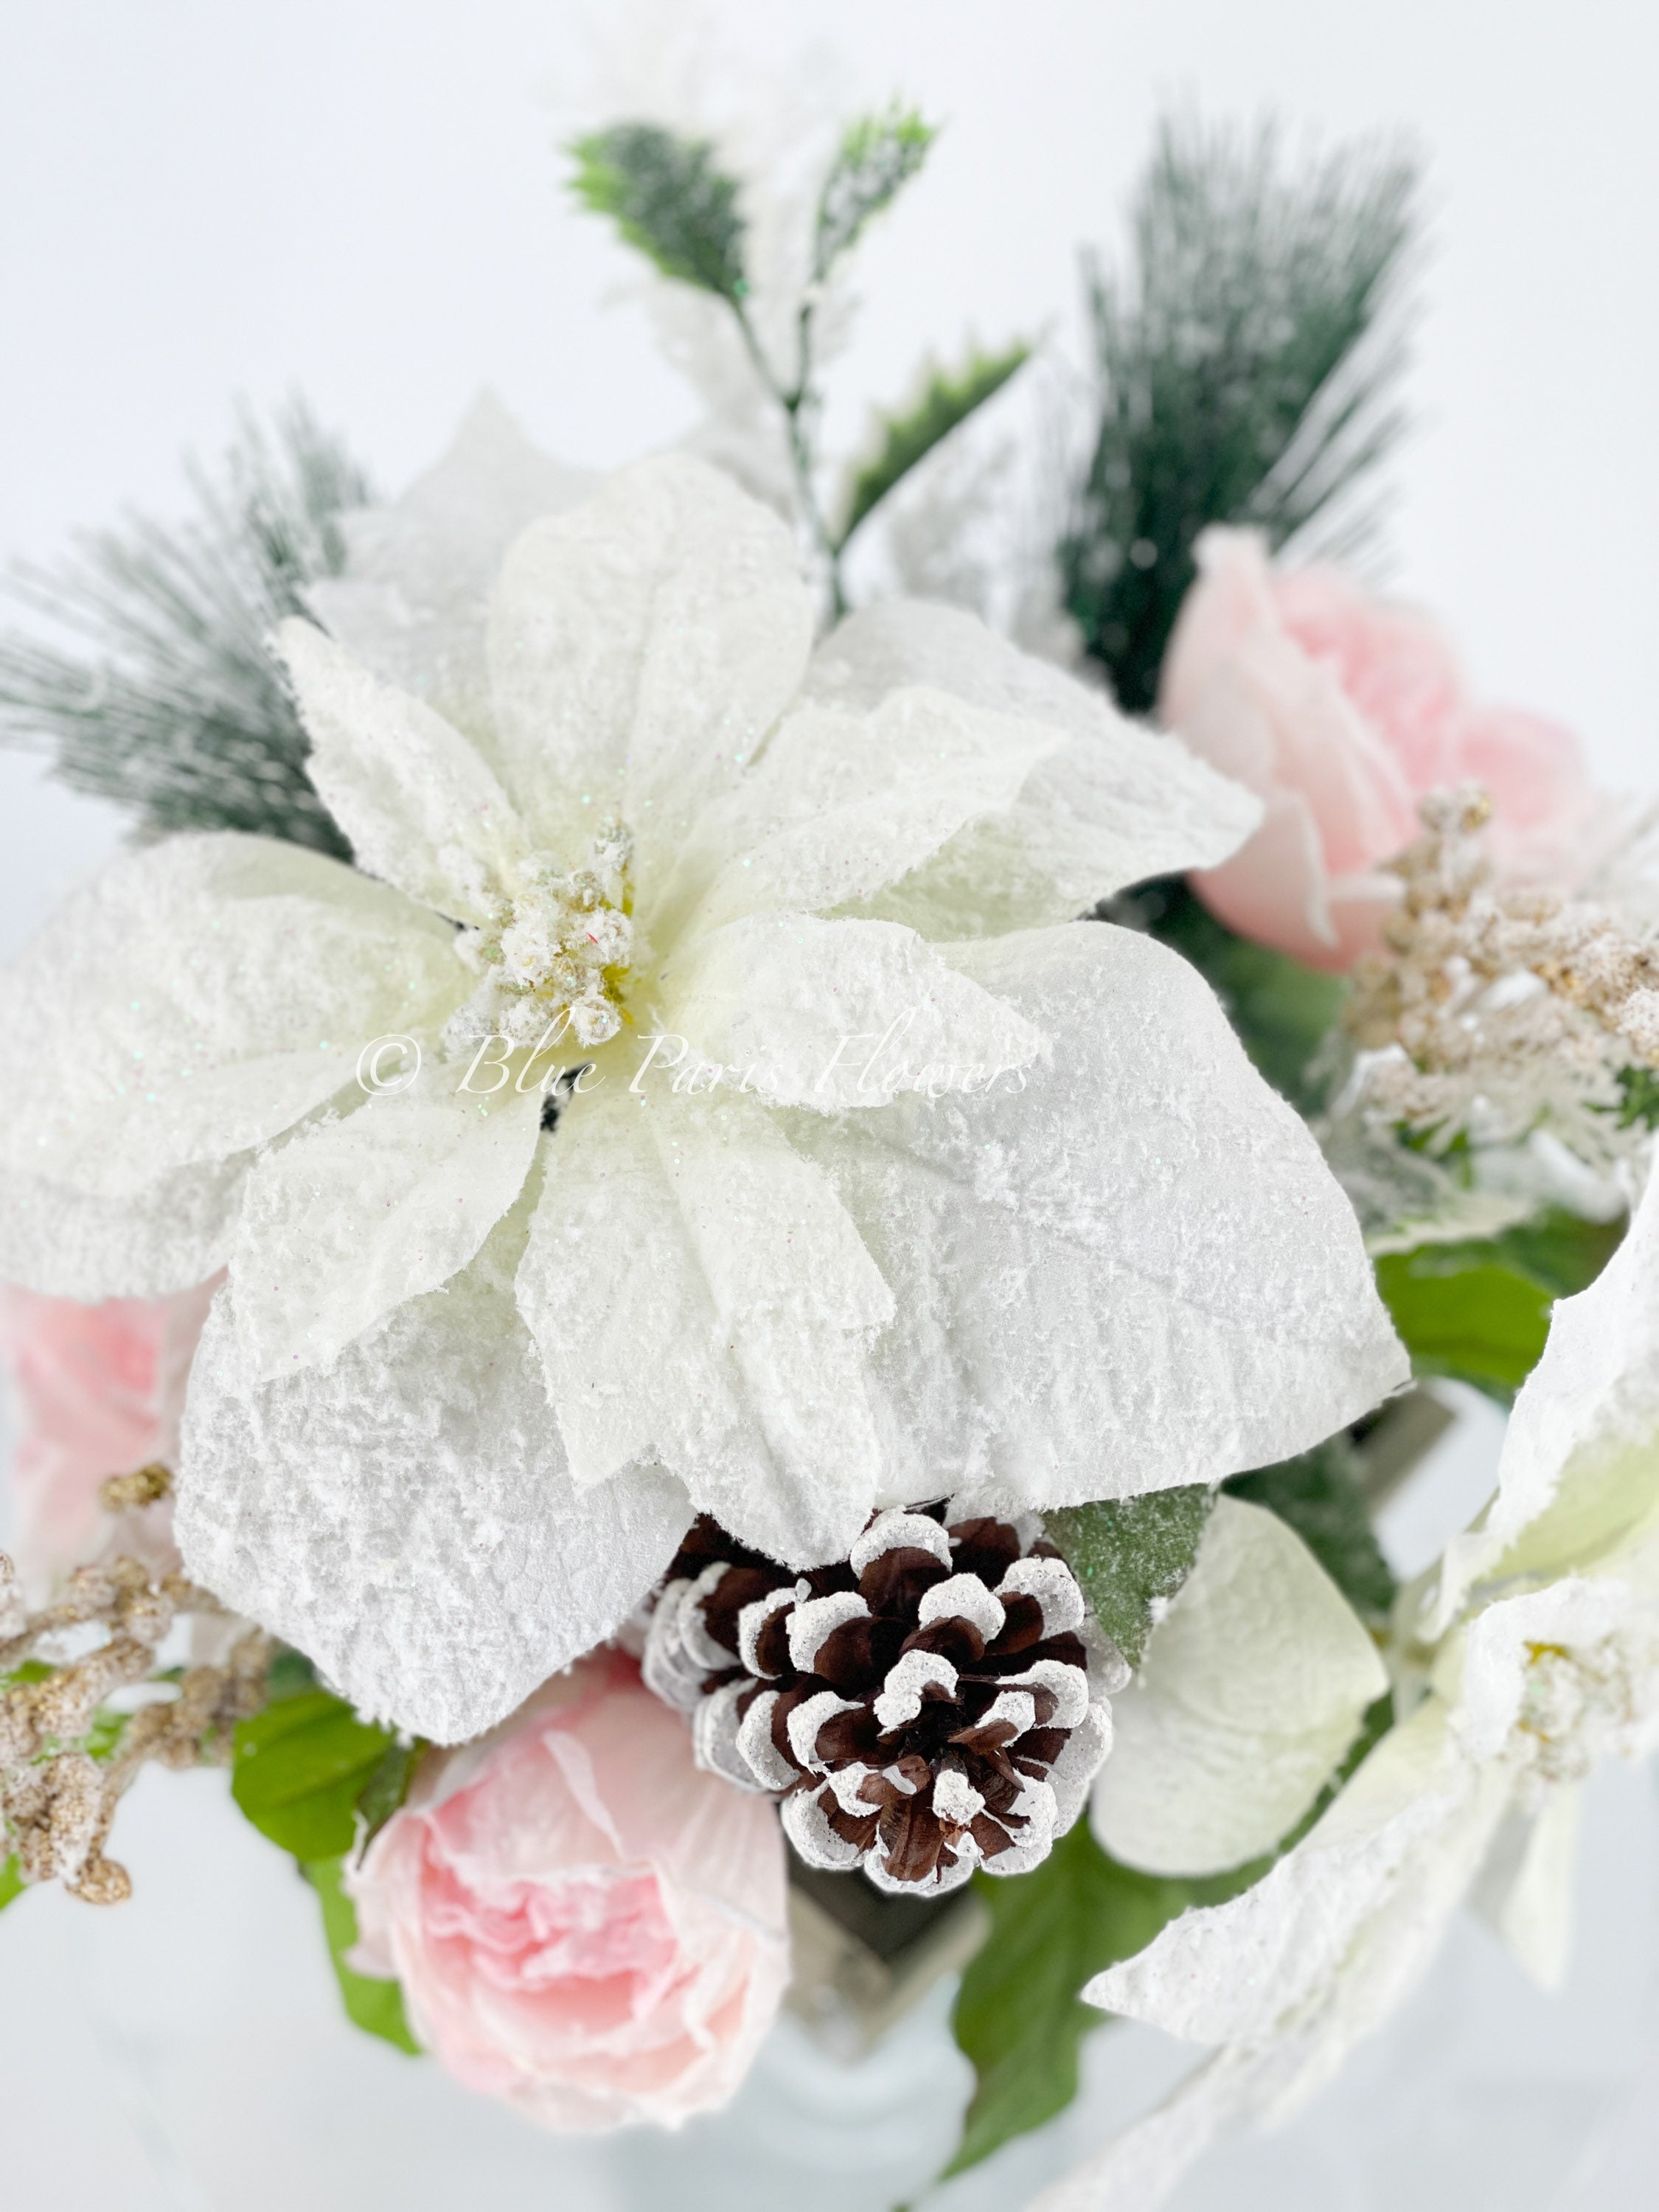 Pin on Christmas Artificial Flowers